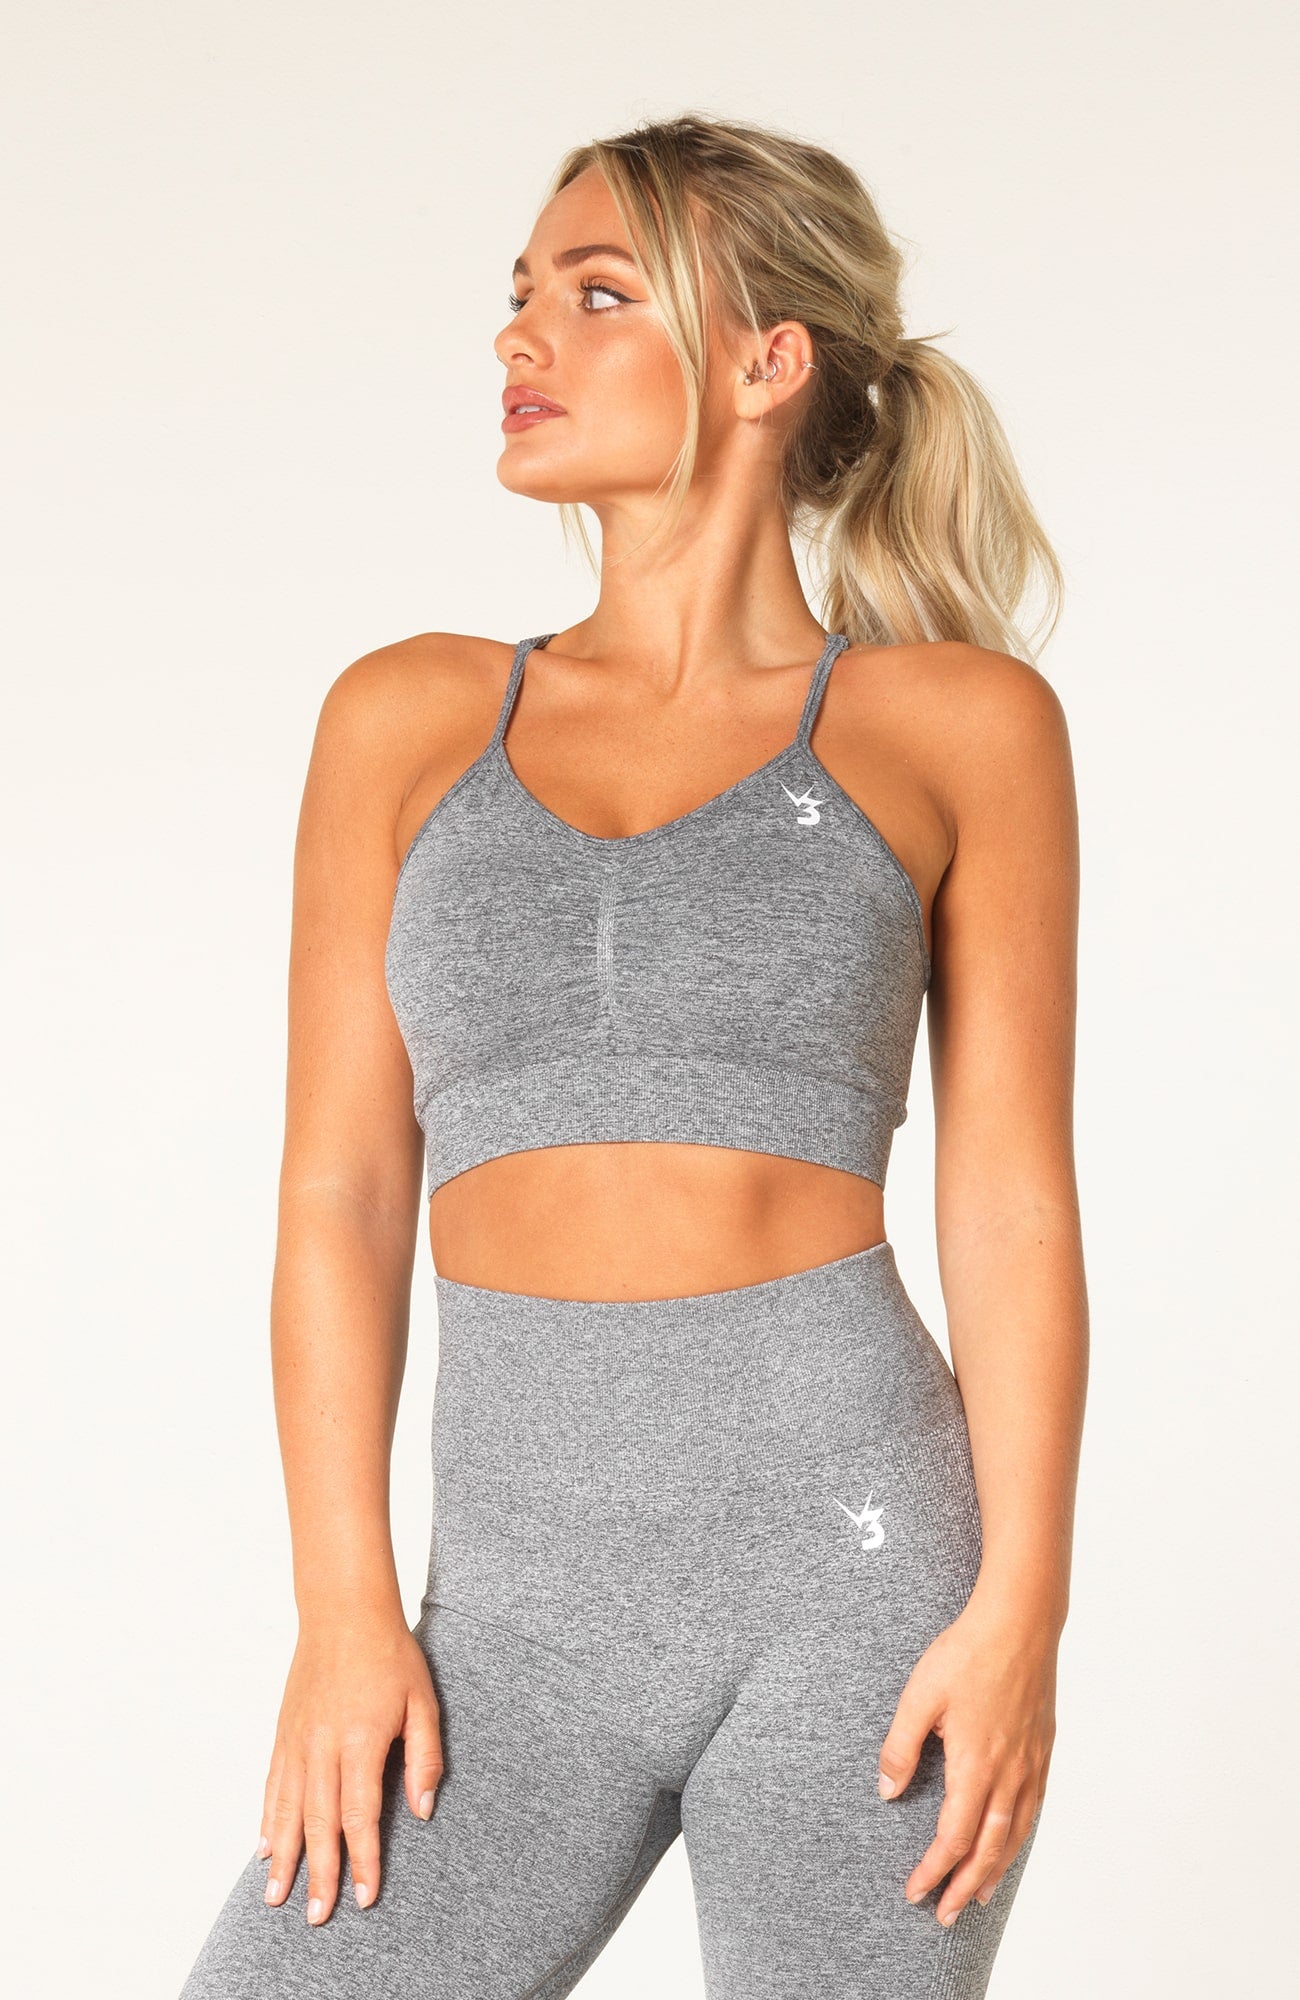 V3 Apparel Women's seamless Define training sports bra in grey marl with removable padded cups and strap for gym workouts training, Running, yoga, bodybuilding and bikini fitness.